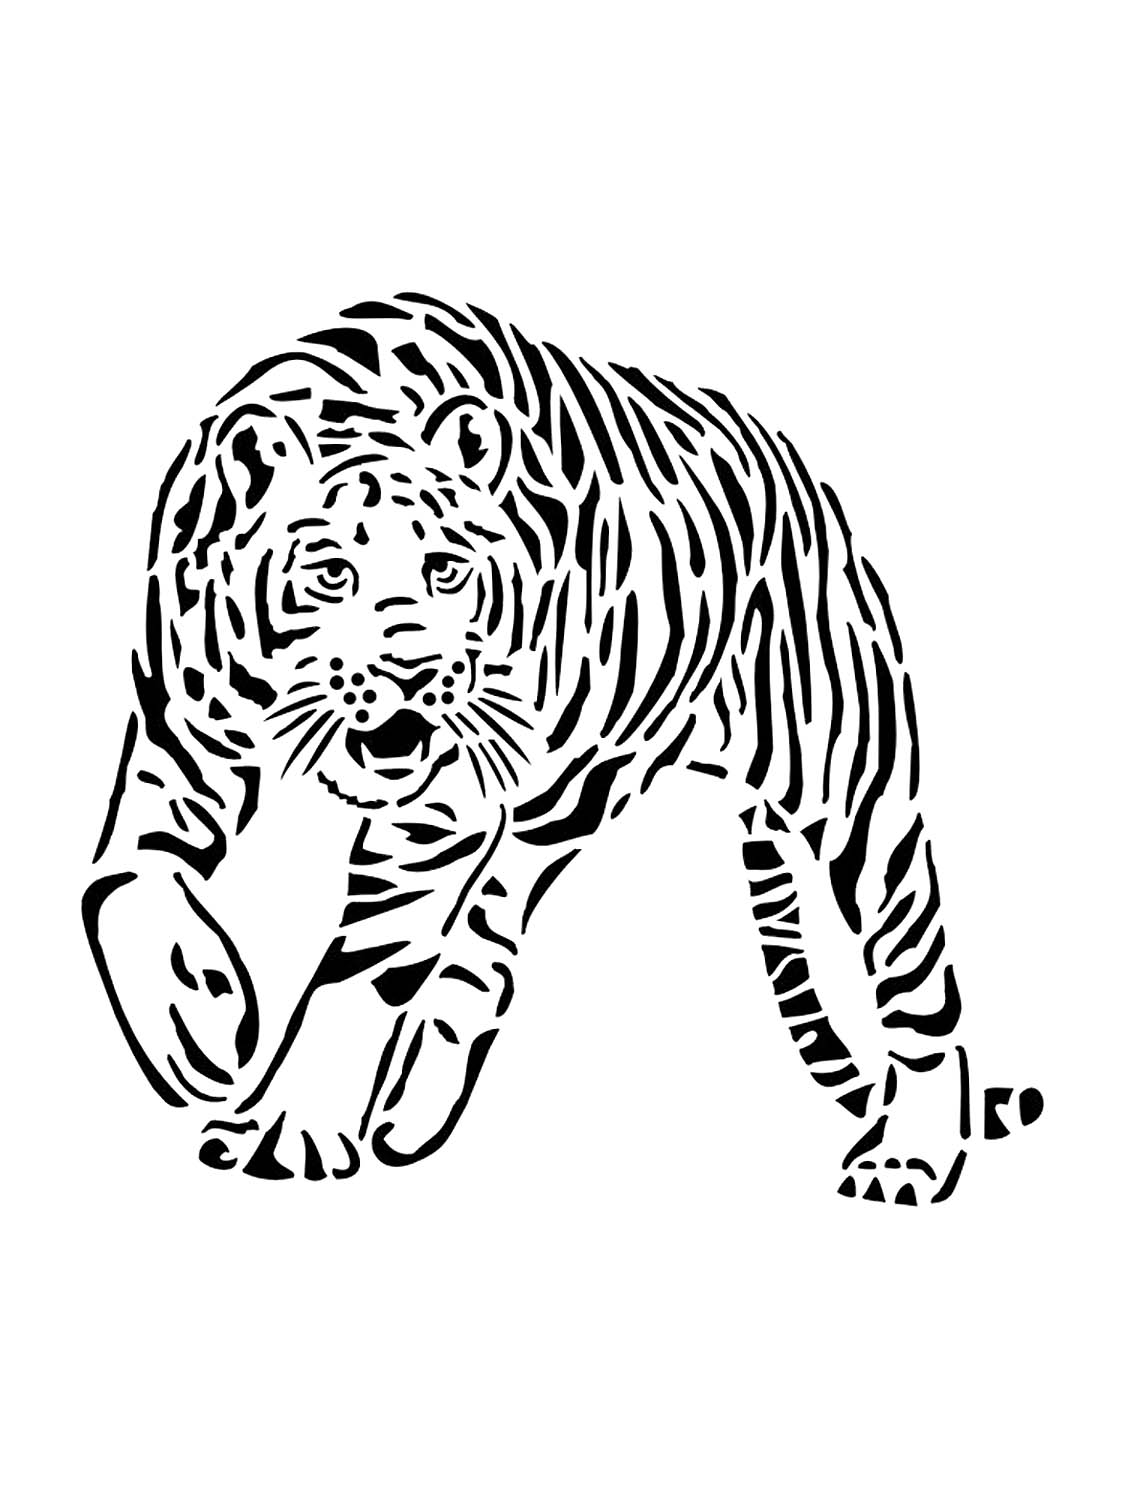 Tiger Stencils Free Stencils And Template Cutout Printable 4748